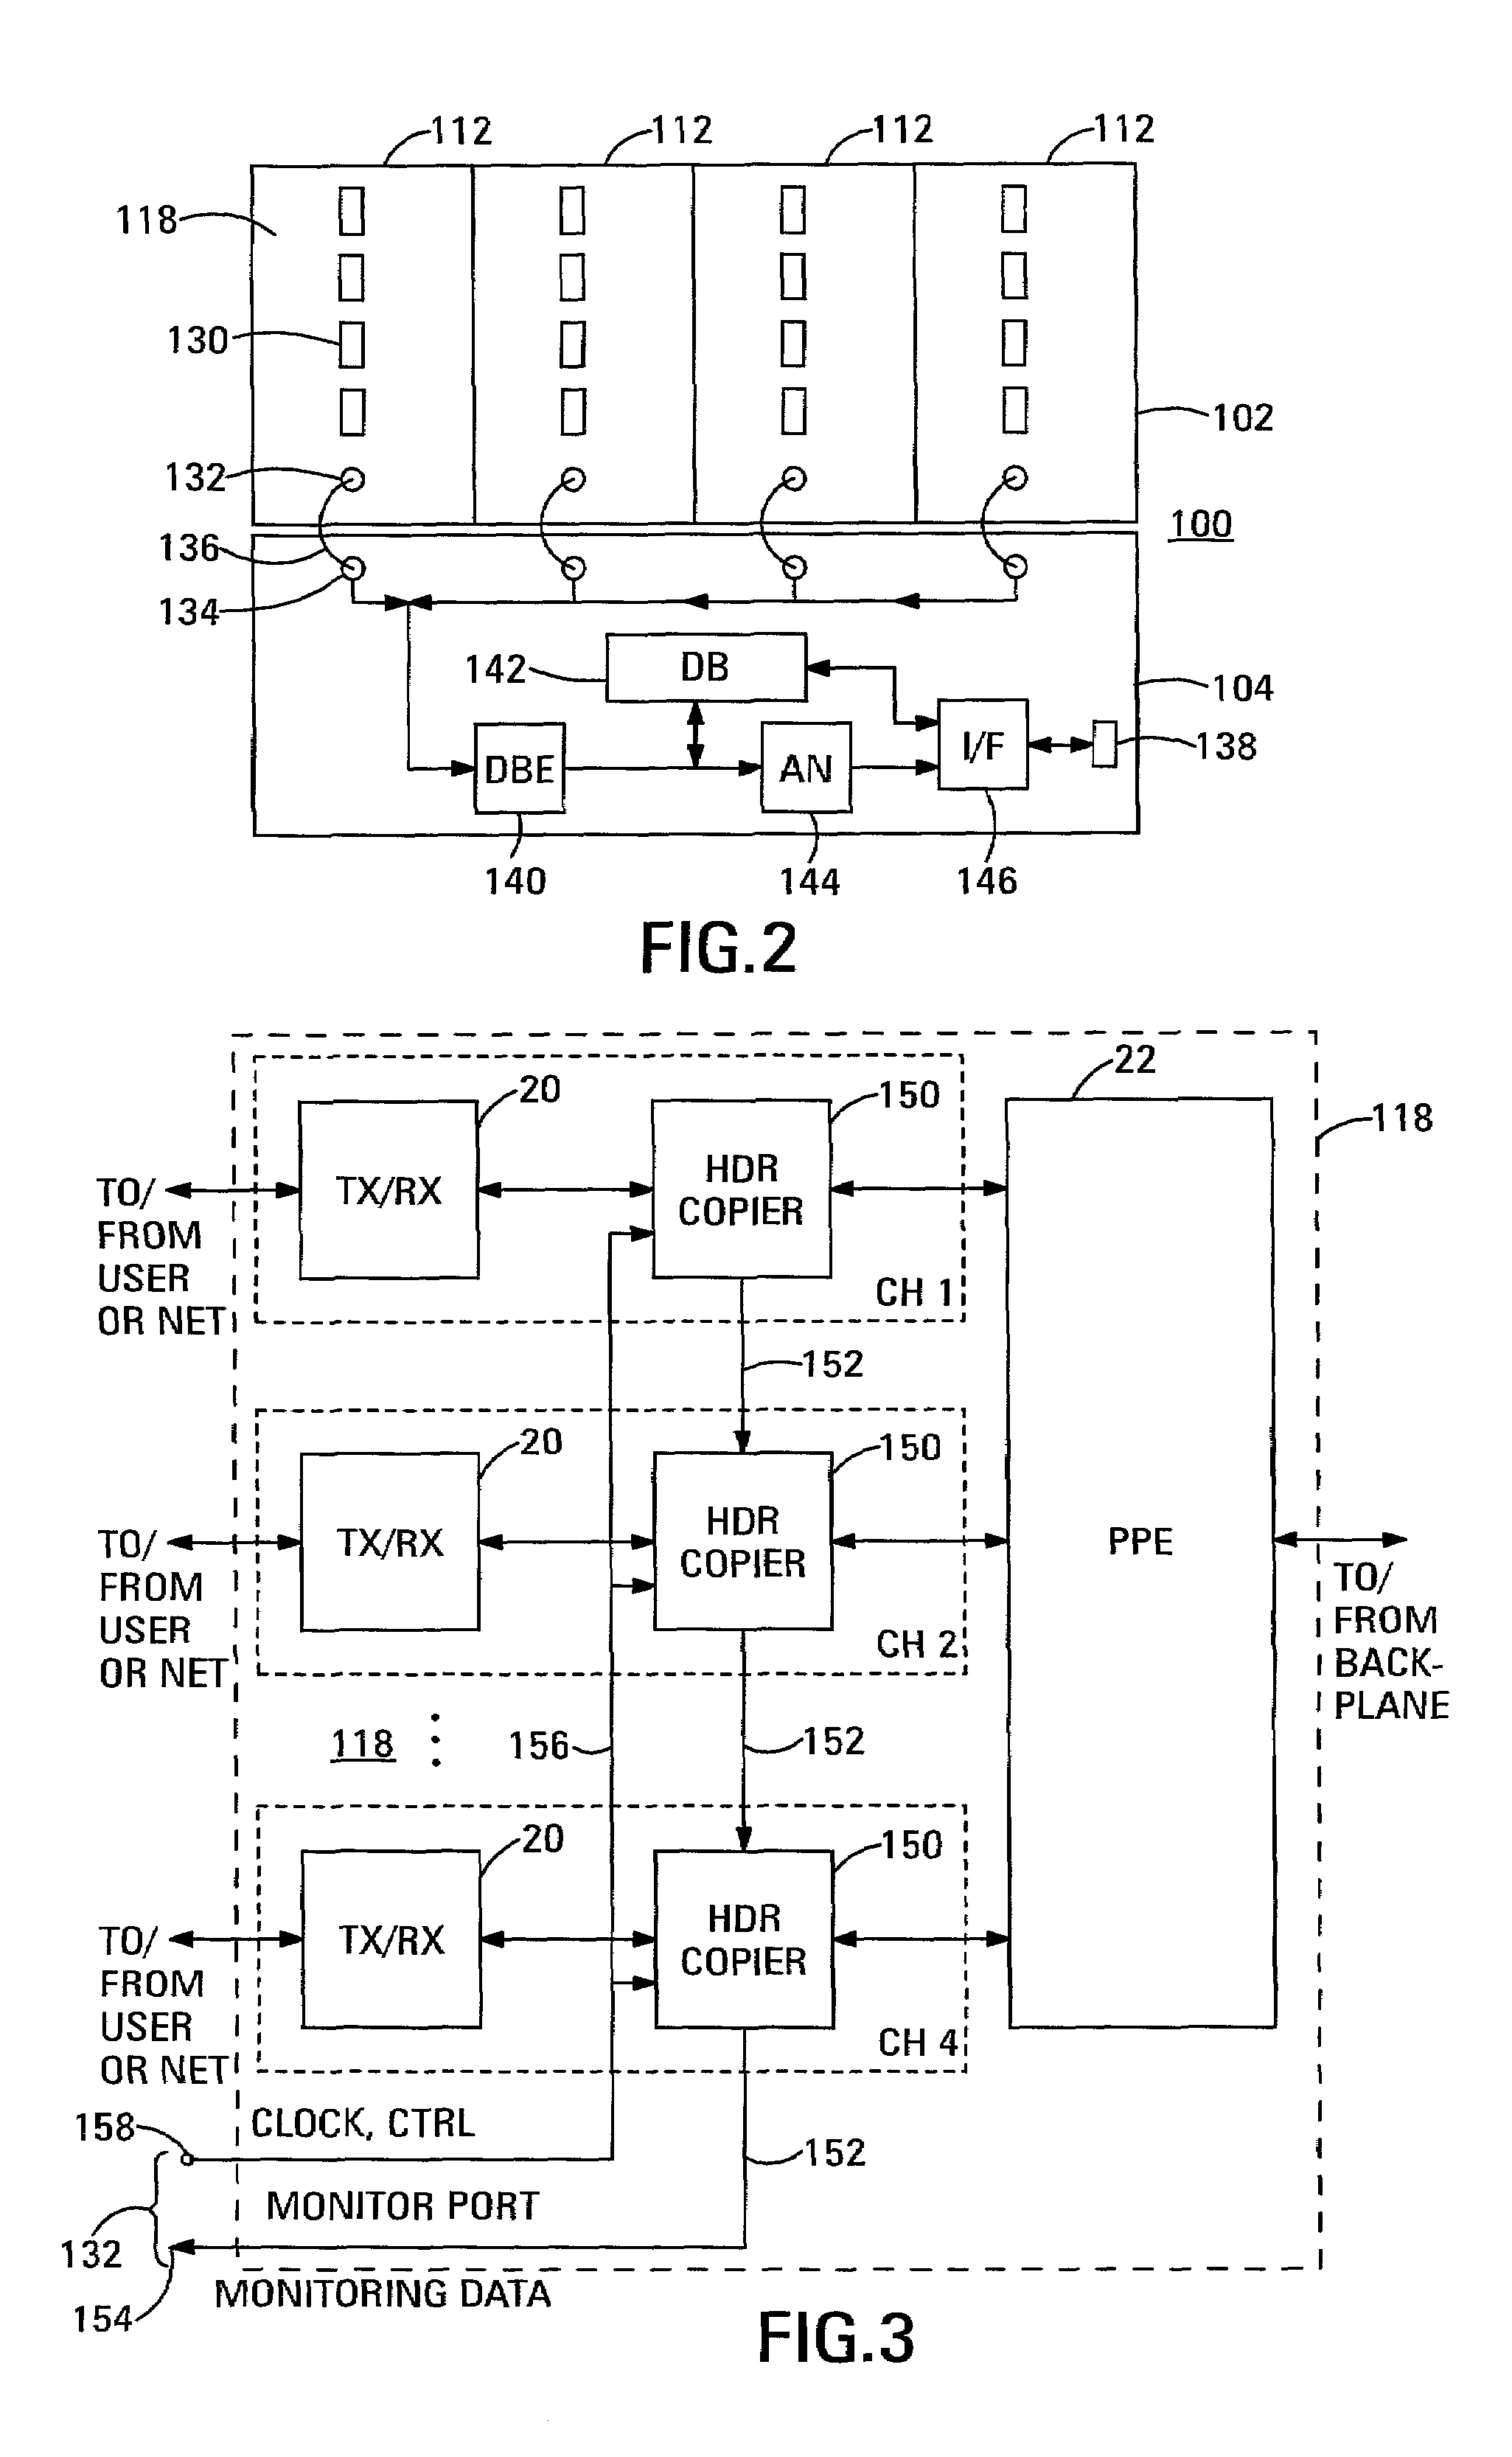 Network monitoring system with built-in monitoring data gathering